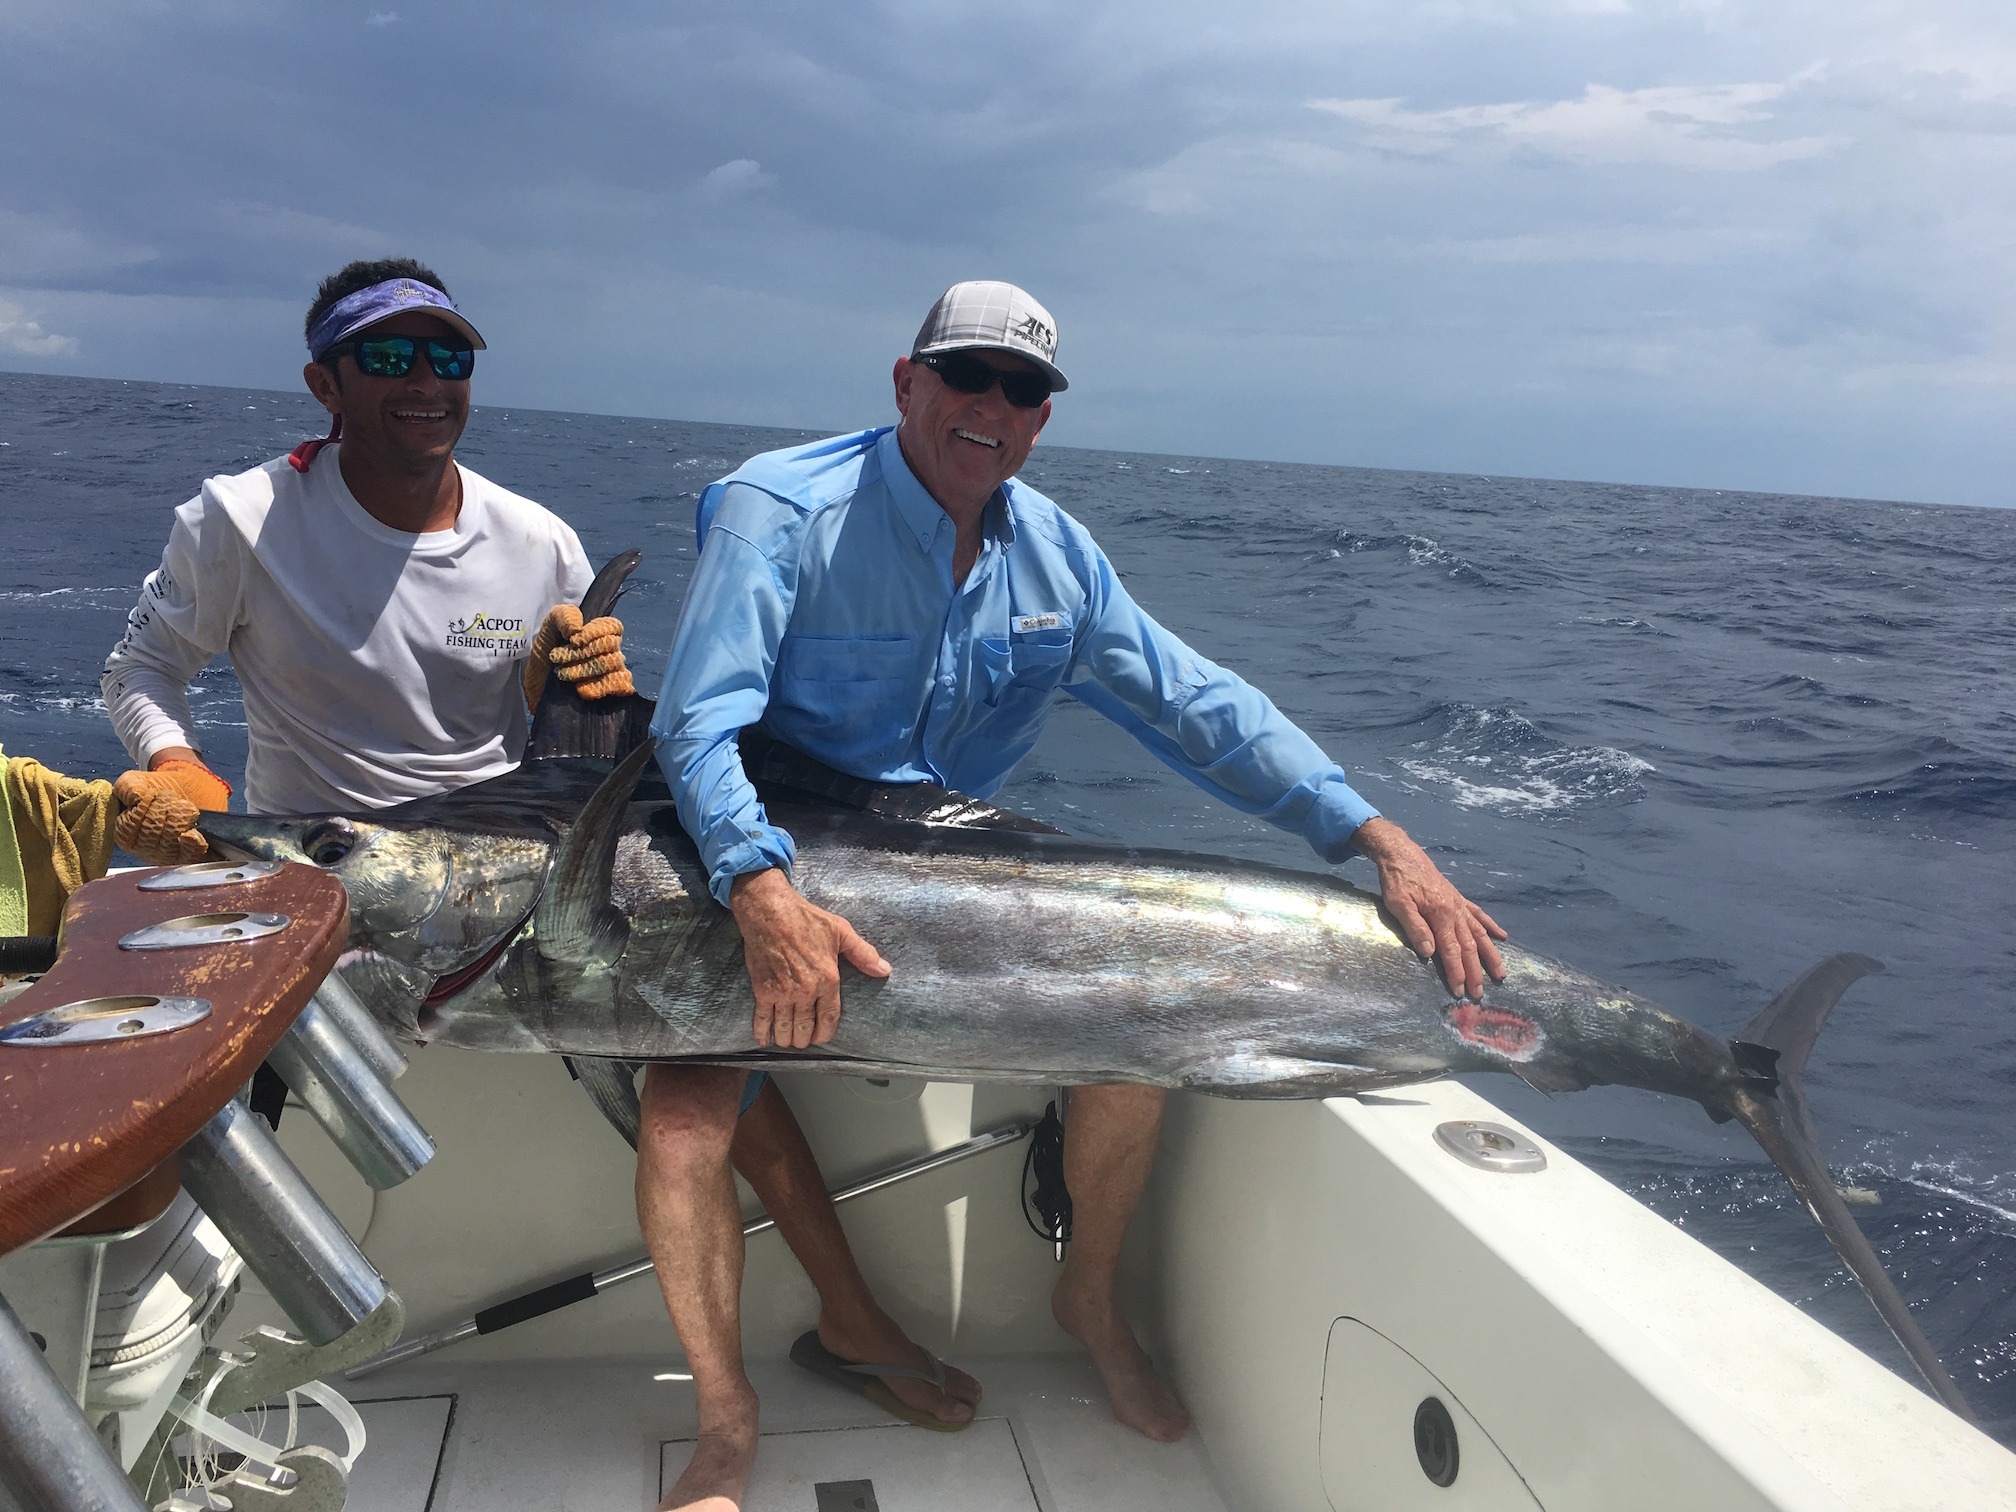 Enter the Sailfish Zone with Costa Rica Fishing Charters